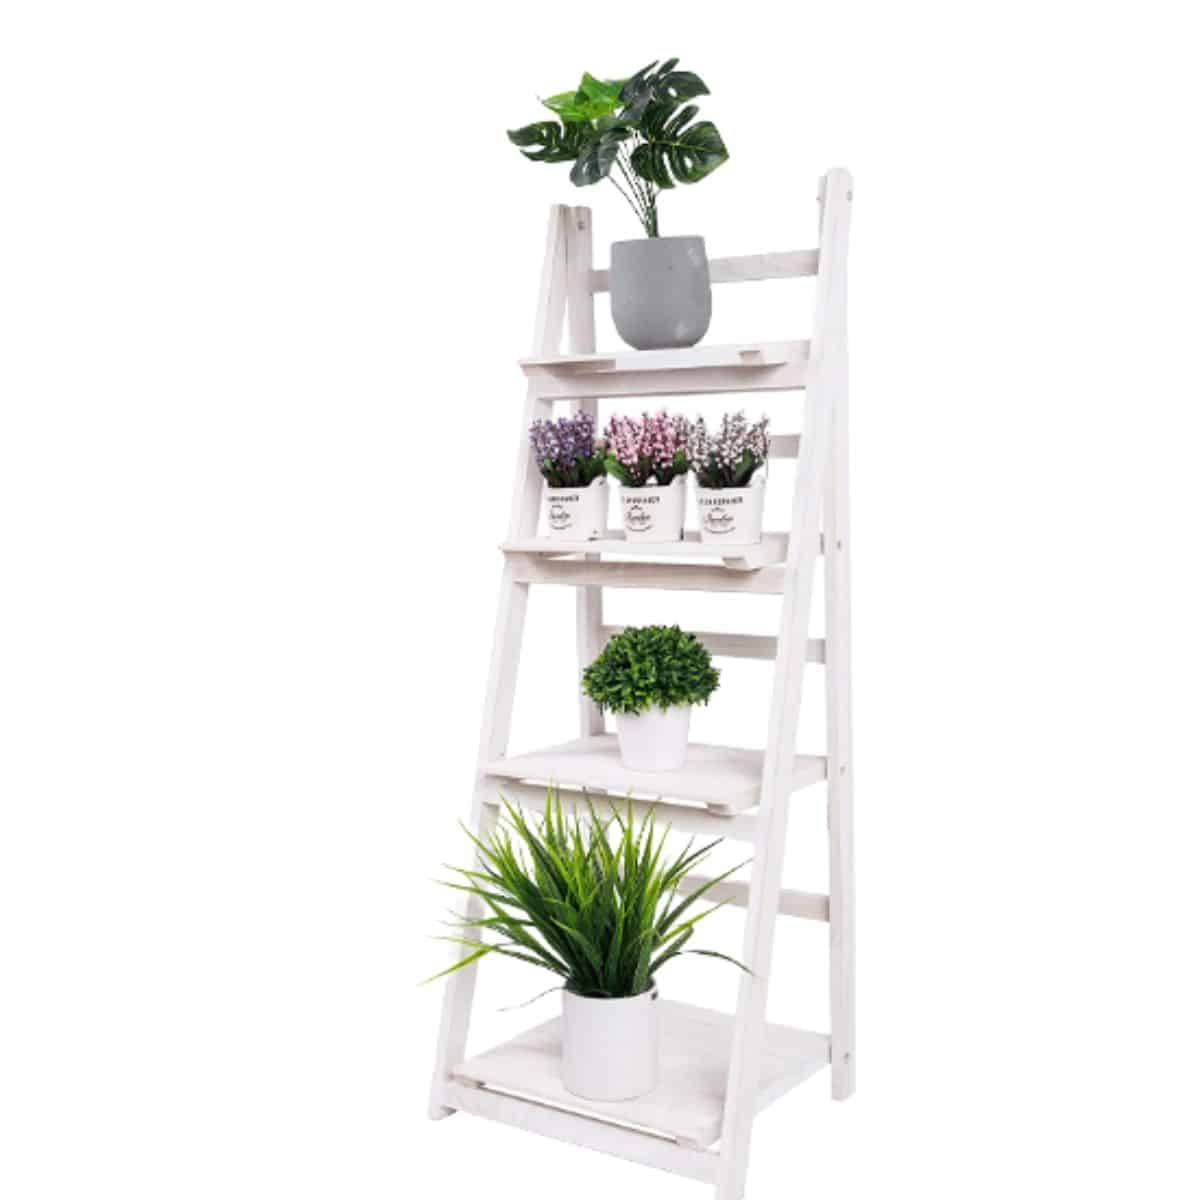 ladder style indoor plant stand with multiple plant shelves and displayed with a variety of plants from Amazon